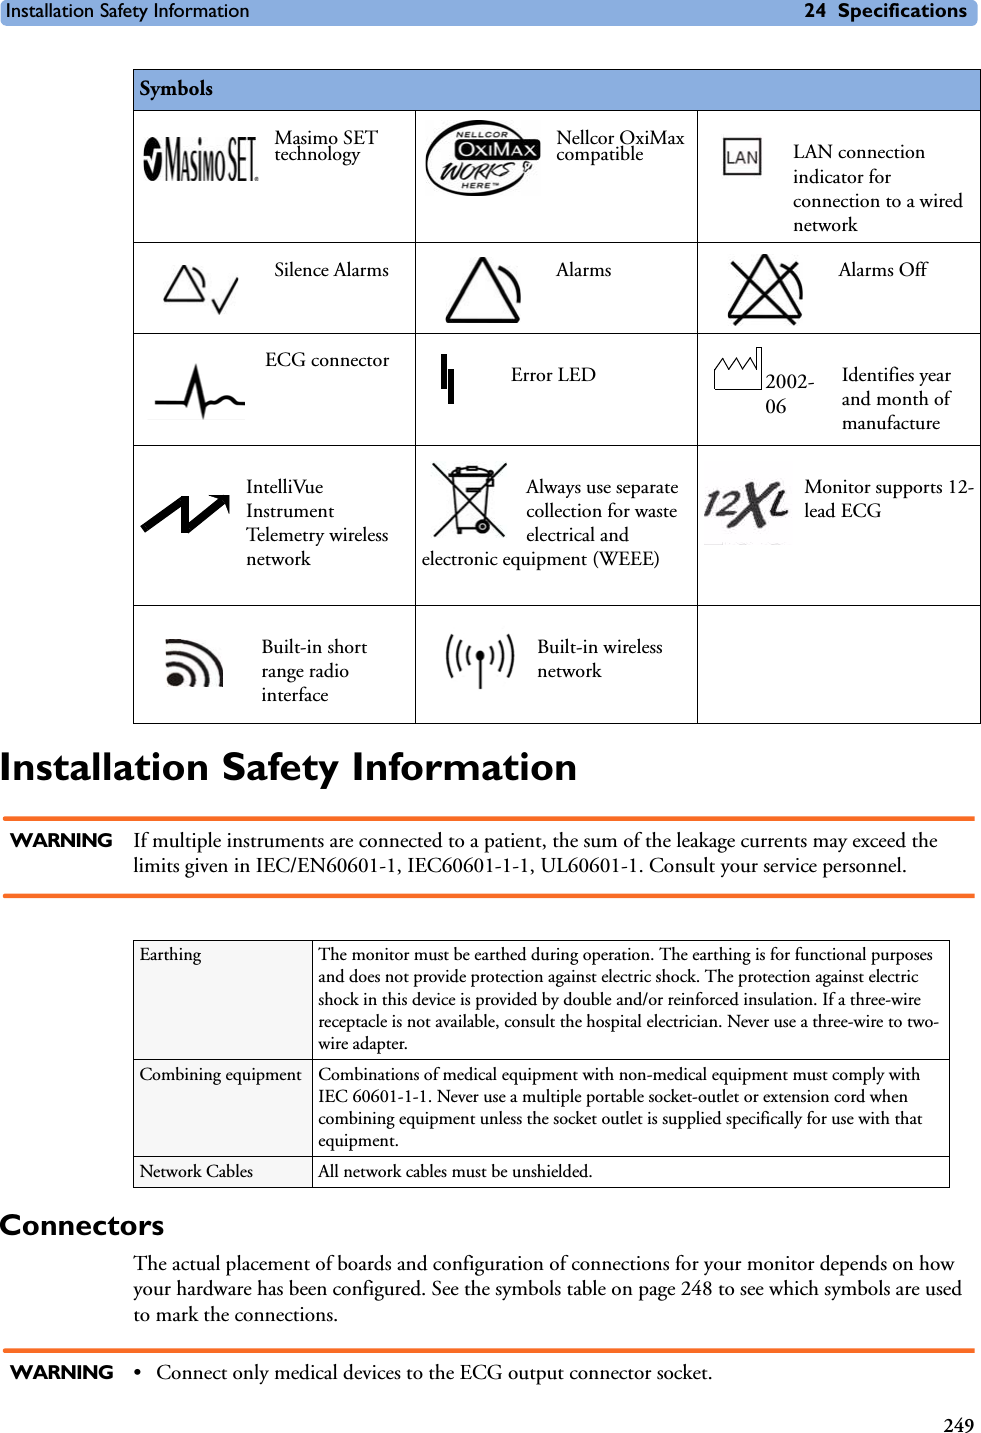 Installation Safety Information 24 Specifications249Installation Safety InformationWARNING If multiple instruments are connected to a patient, the sum of the leakage currents may exceed the limits given in IEC/EN60601-1, IEC60601-1-1, UL60601-1. Consult your service personnel.ConnectorsThe actual placement of boards and configuration of connections for your monitor depends on how your hardware has been configured. See the symbols table on page 248 to see which symbols are used to mark the connections.WARNING • Connect only medical devices to the ECG output connector socket.Masimo SET technology Nellcor OxiMax compatible LAN connection indicator for connection to a wired networkSilence Alarms Alarms Alarms OffECG connector Error LED Identifies year and month of manufactureIntelliVue Instrument Telemetry wireless network  Always use separate collection for waste electrical and electronic equipment (WEEE)Monitor supports 12-lead ECGBuilt-in short range radio interface Built-in wireless networkSymbols2002-06Earthing The monitor must be earthed during operation. The earthing is for functional purposes and does not provide protection against electric shock. The protection against electric shock in this device is provided by double and/or reinforced insulation. If a three-wire receptacle is not available, consult the hospital electrician. Never use a three-wire to two-wire adapter.Combining equipment Combinations of medical equipment with non-medical equipment must comply with IEC 60601-1-1. Never use a multiple portable socket-outlet or extension cord when combining equipment unless the socket outlet is supplied specifically for use with that equipment.Network Cables All network cables must be unshielded.